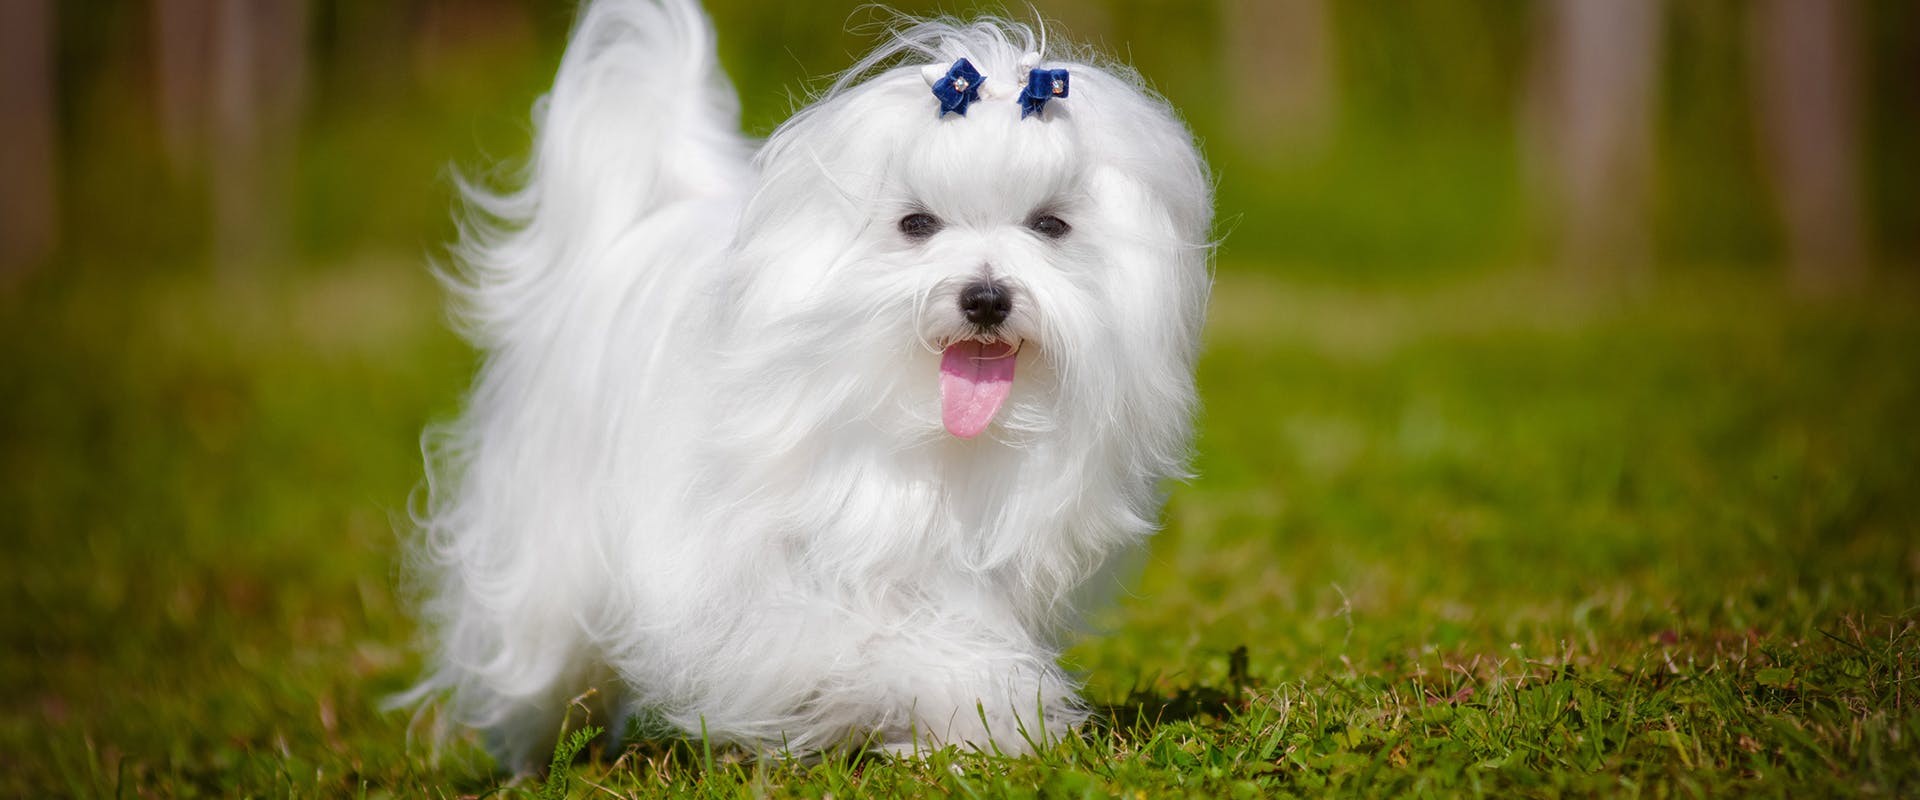 A Maltese dog wearing two blue clips to keep its fur away from its face